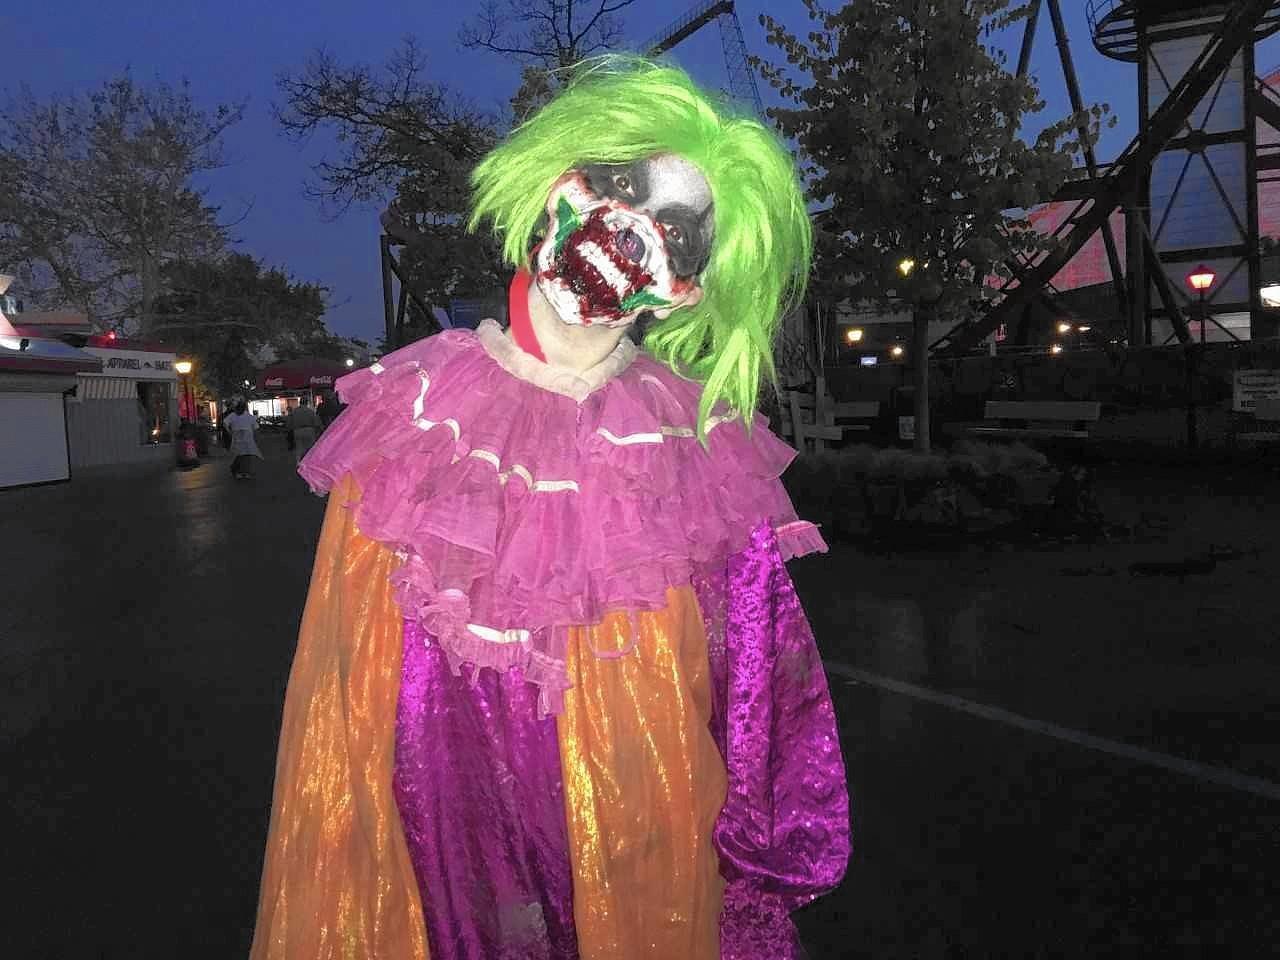 The Grounds Ct-lns-great-america-early-fright-fest-st-0916-20170915